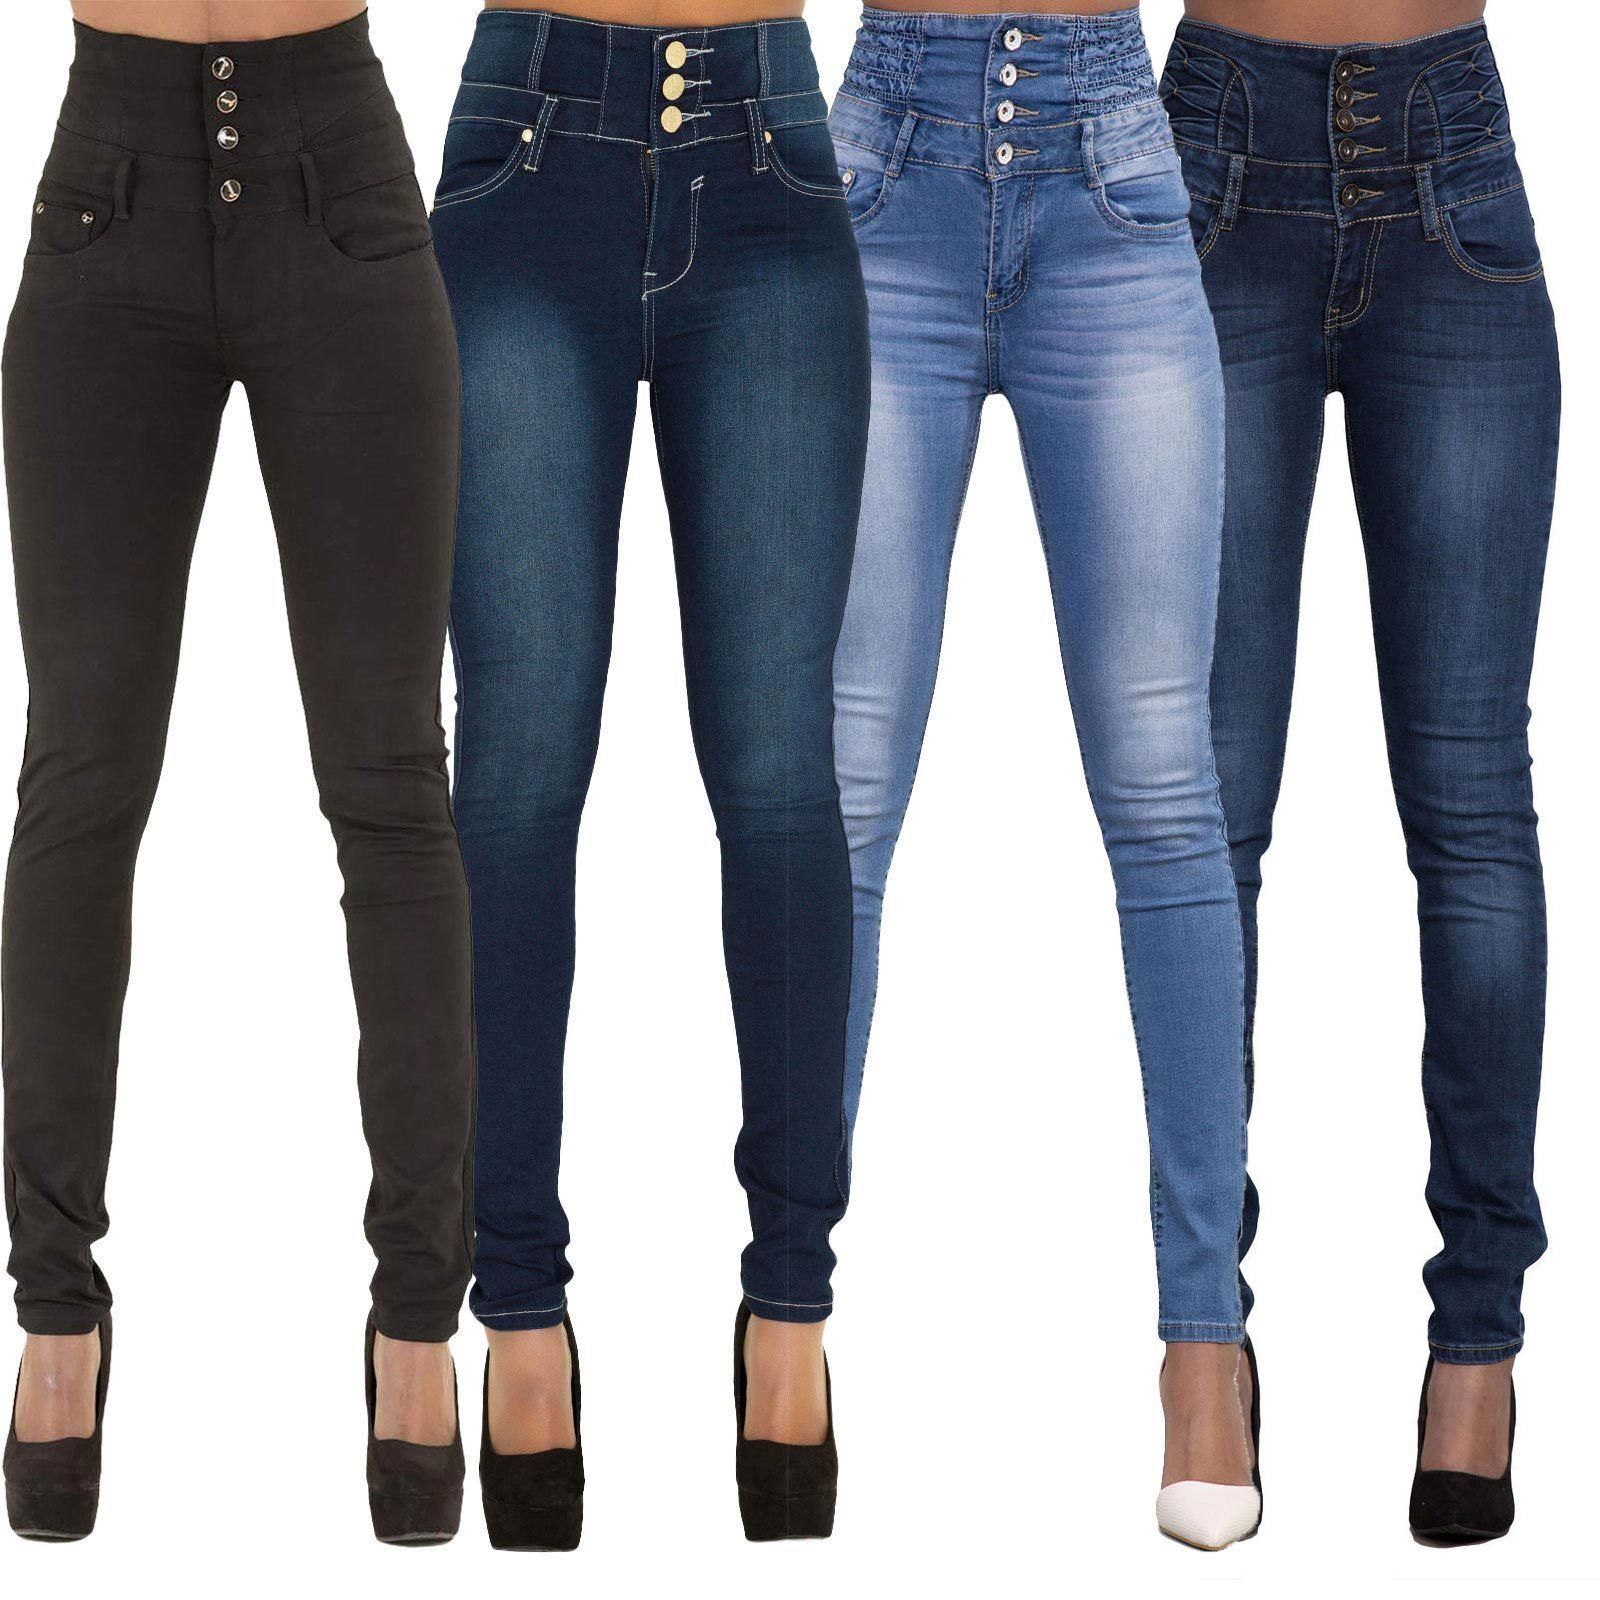 variety of jeans pant